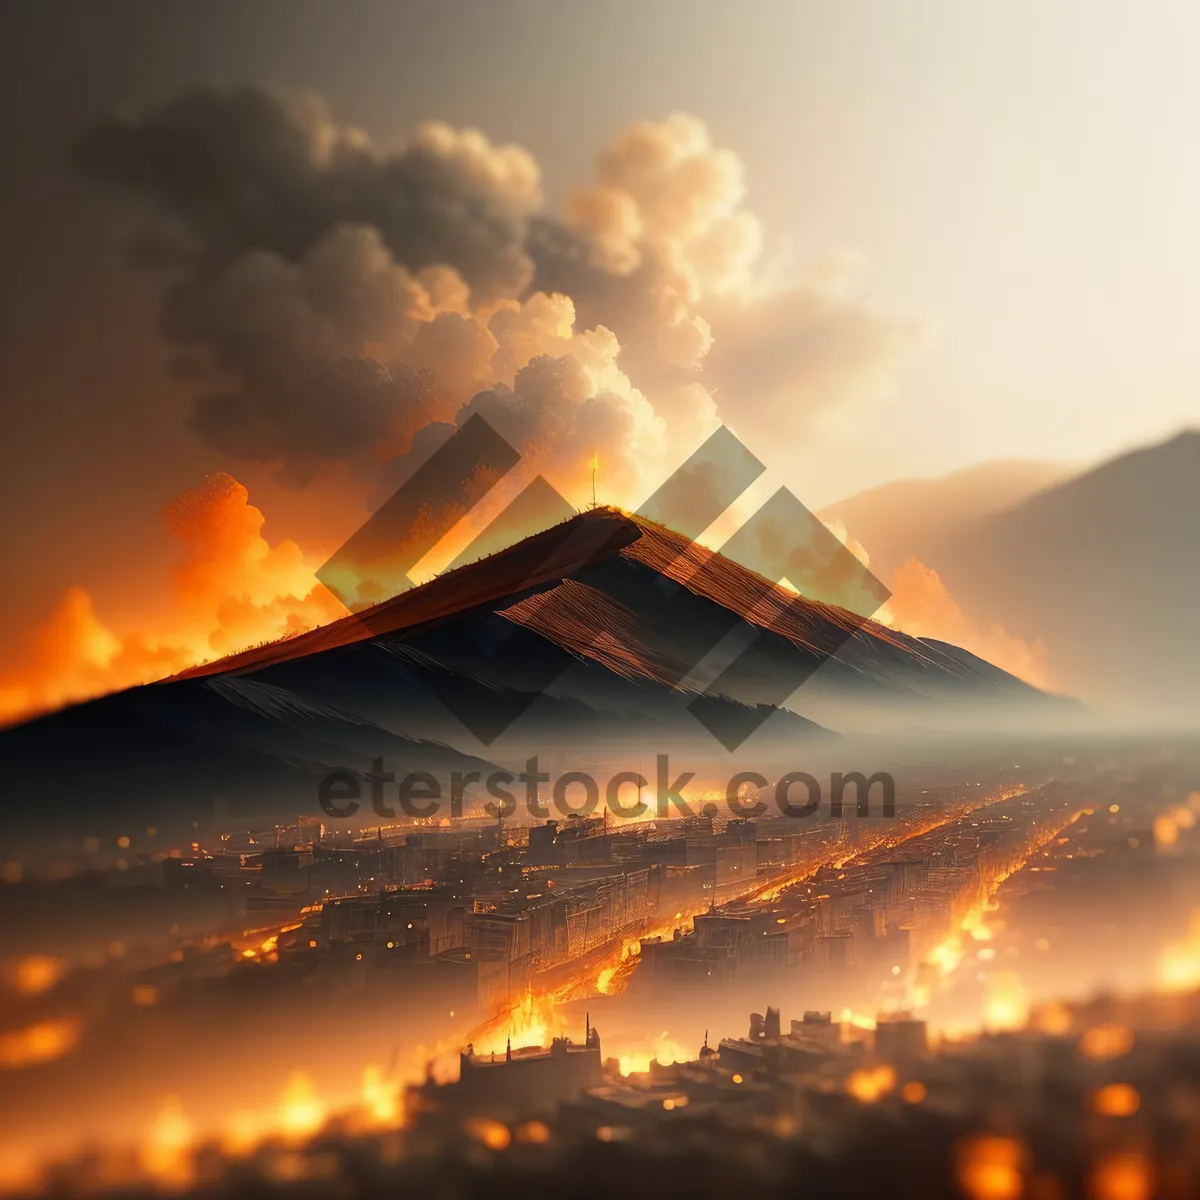 Picture of Fiery Skies over Majestic Volcanic Landscape